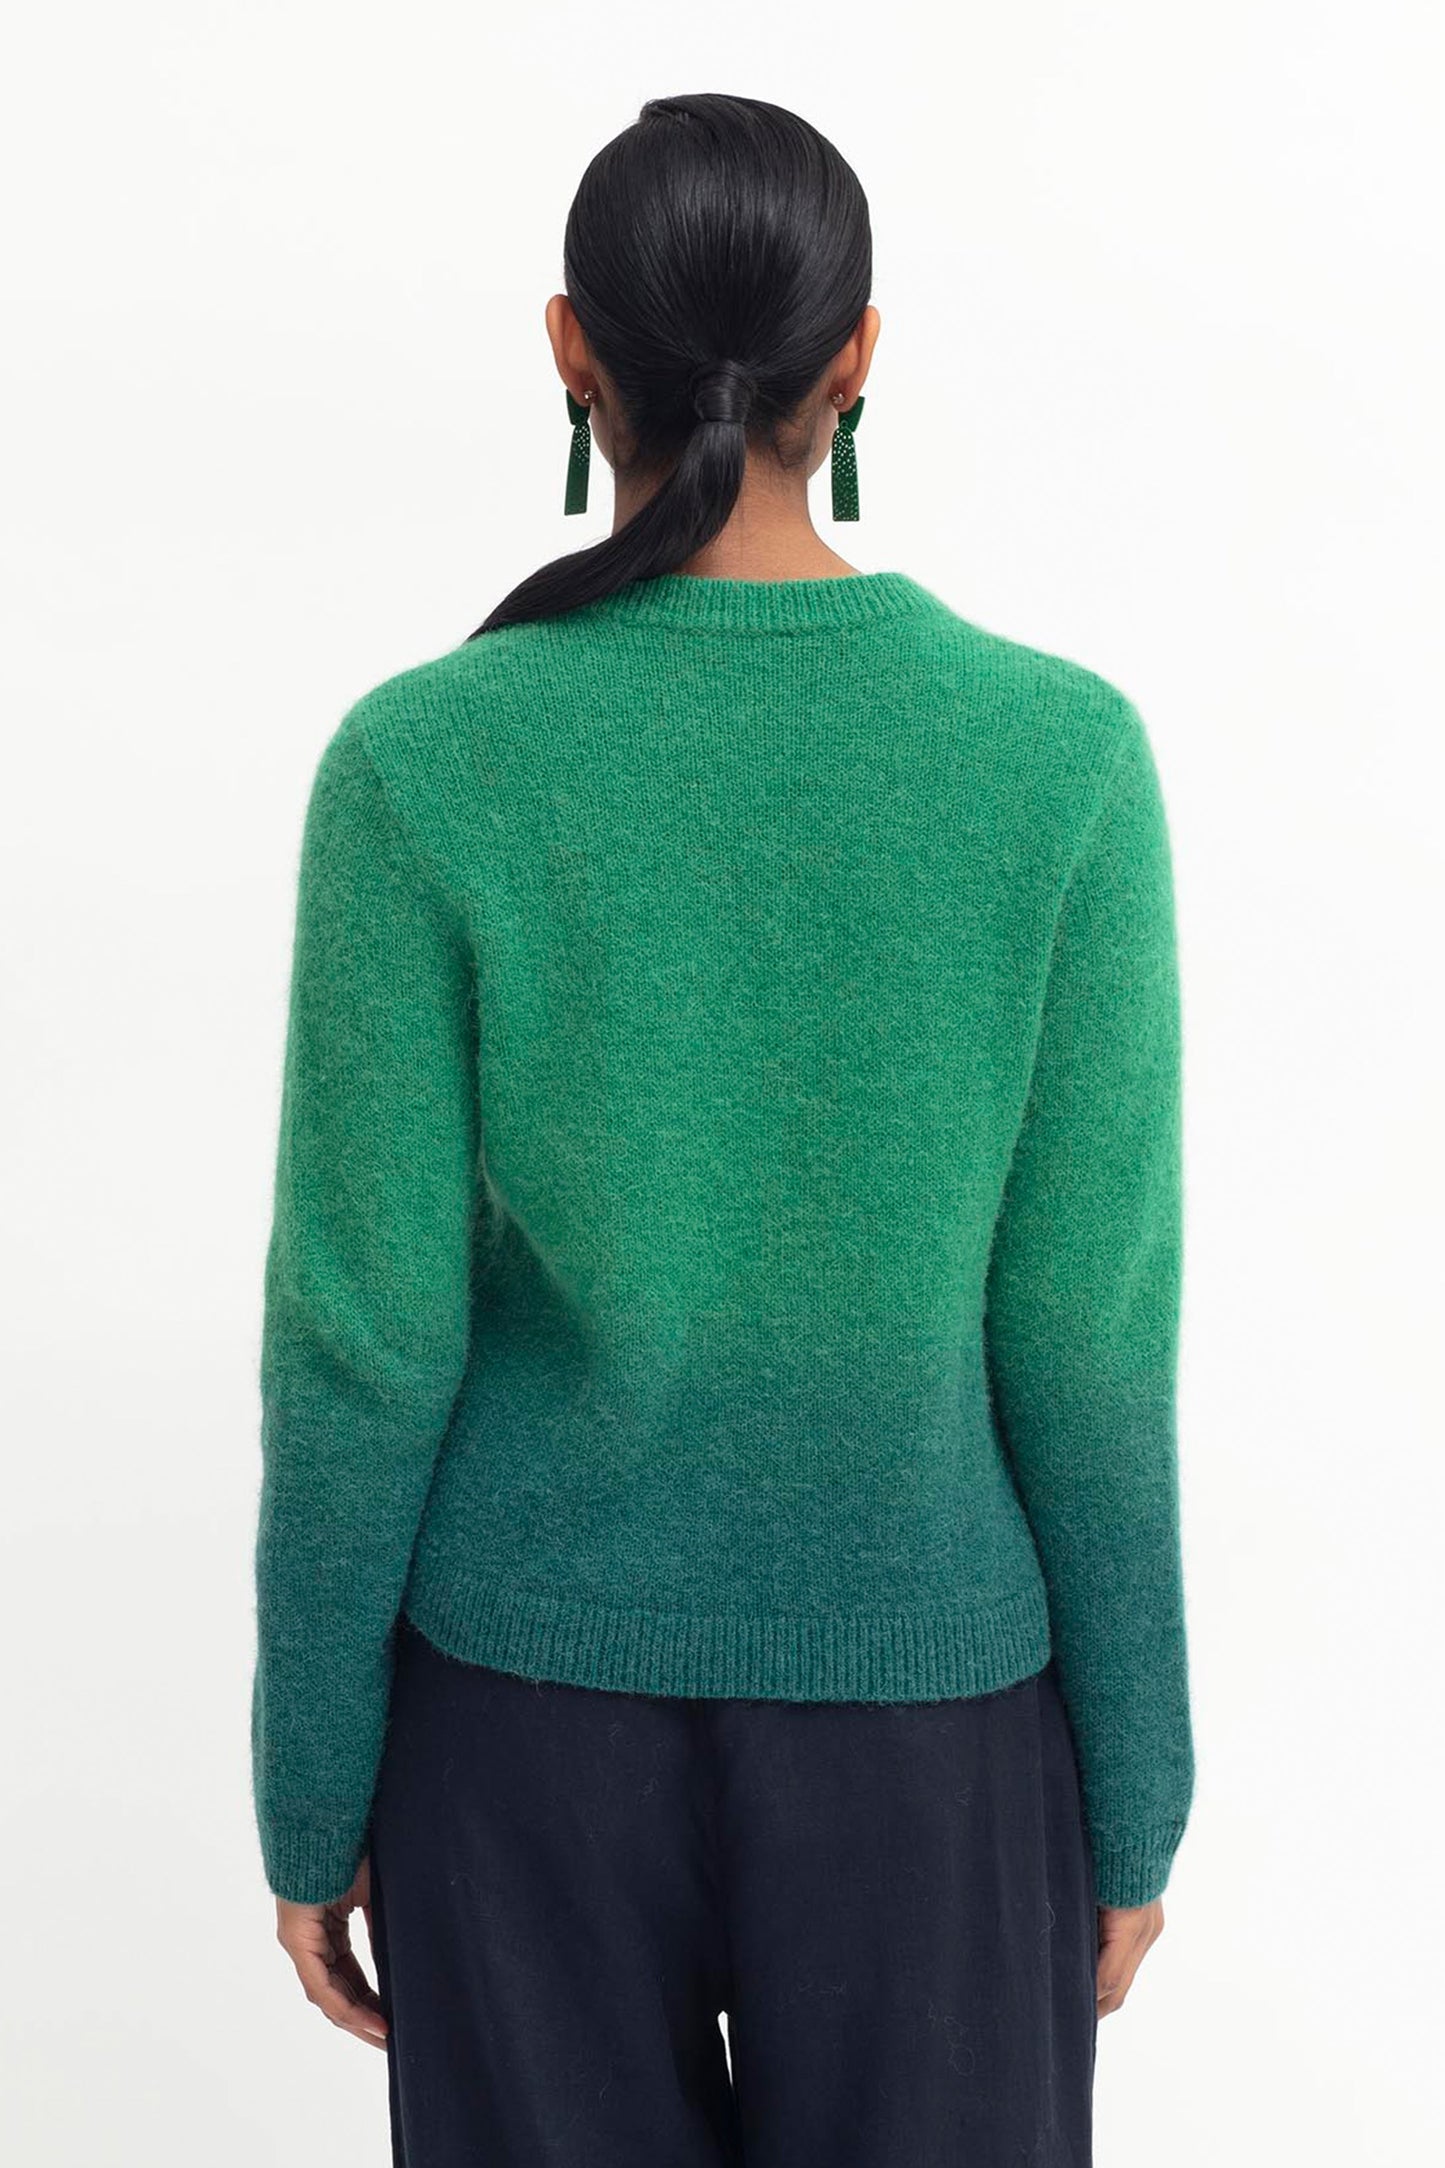 Ombre Crew Neck Dip Tied Knit Sweater Model Back | GREEN TEAL OMBRE